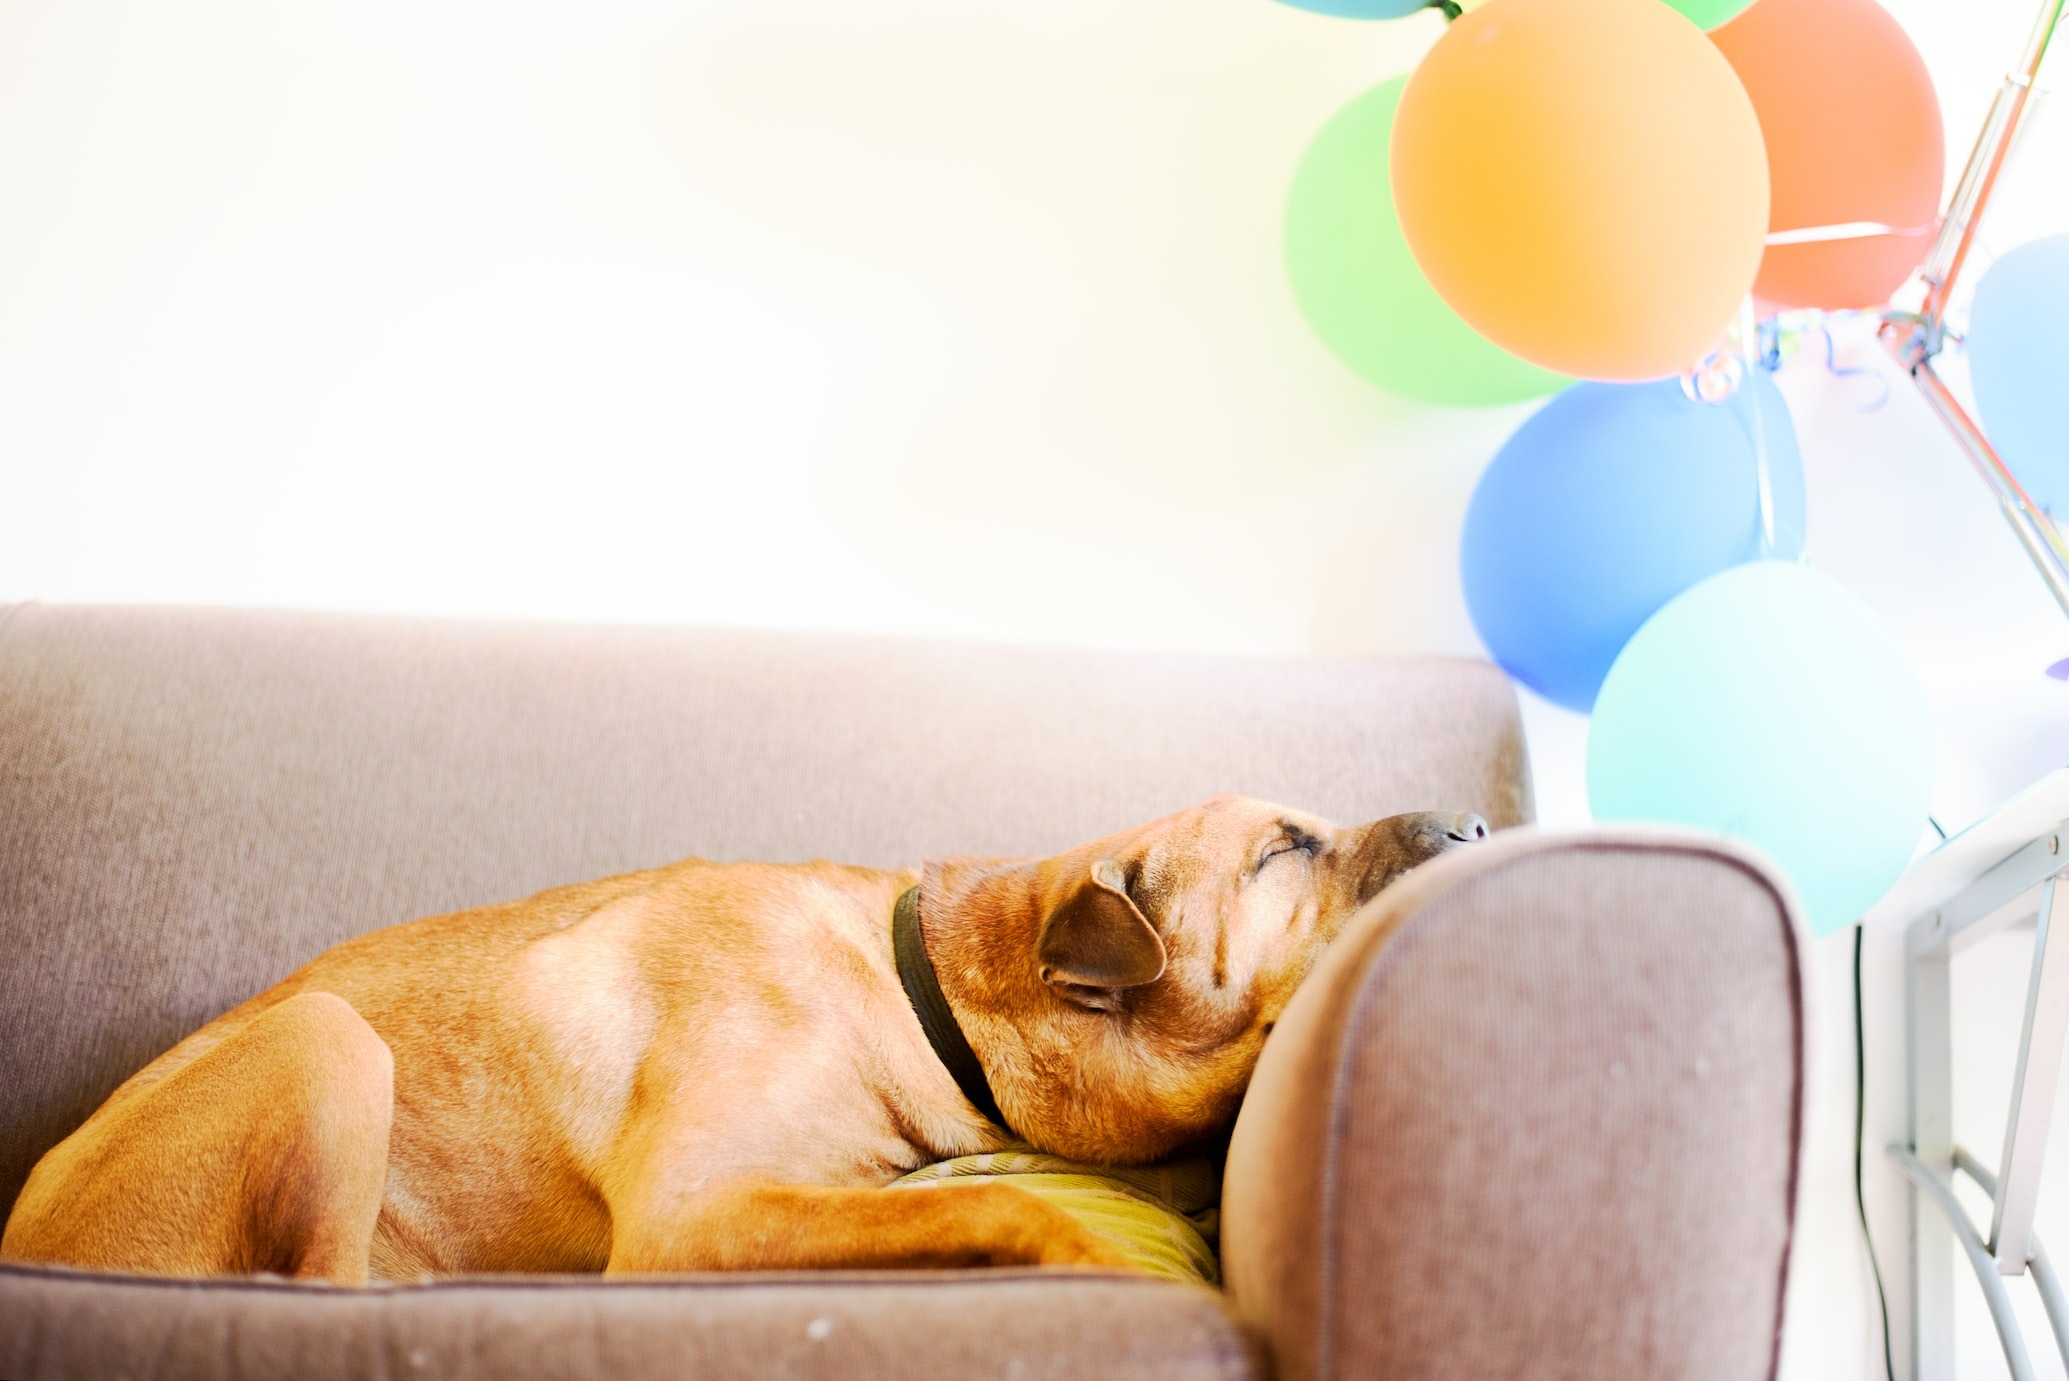 sleeping brown short-coated dog on couch with balloons nearby